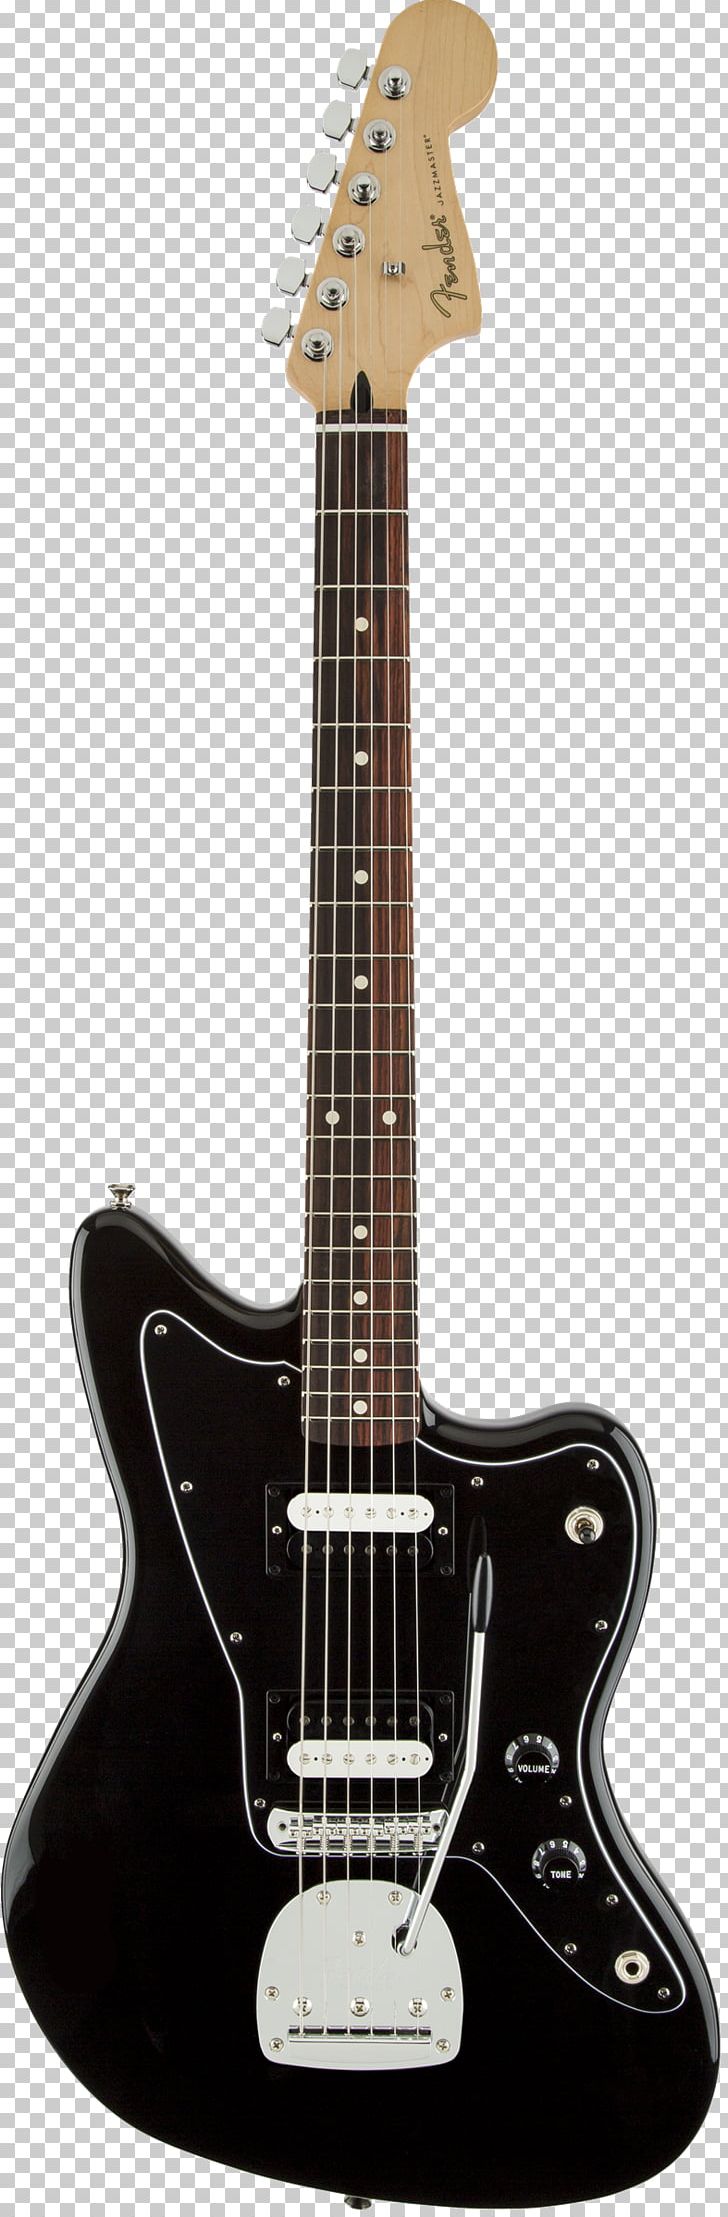 Fender Jazzmaster Squier Deluxe Hot Rails Stratocaster Guitar Squier Affinity Series Jazzmaster HH PNG, Clipart, Acoustic Electric Guitar, Guitar Accessory, Neck, Objects, Plucked String Instruments Free PNG Download